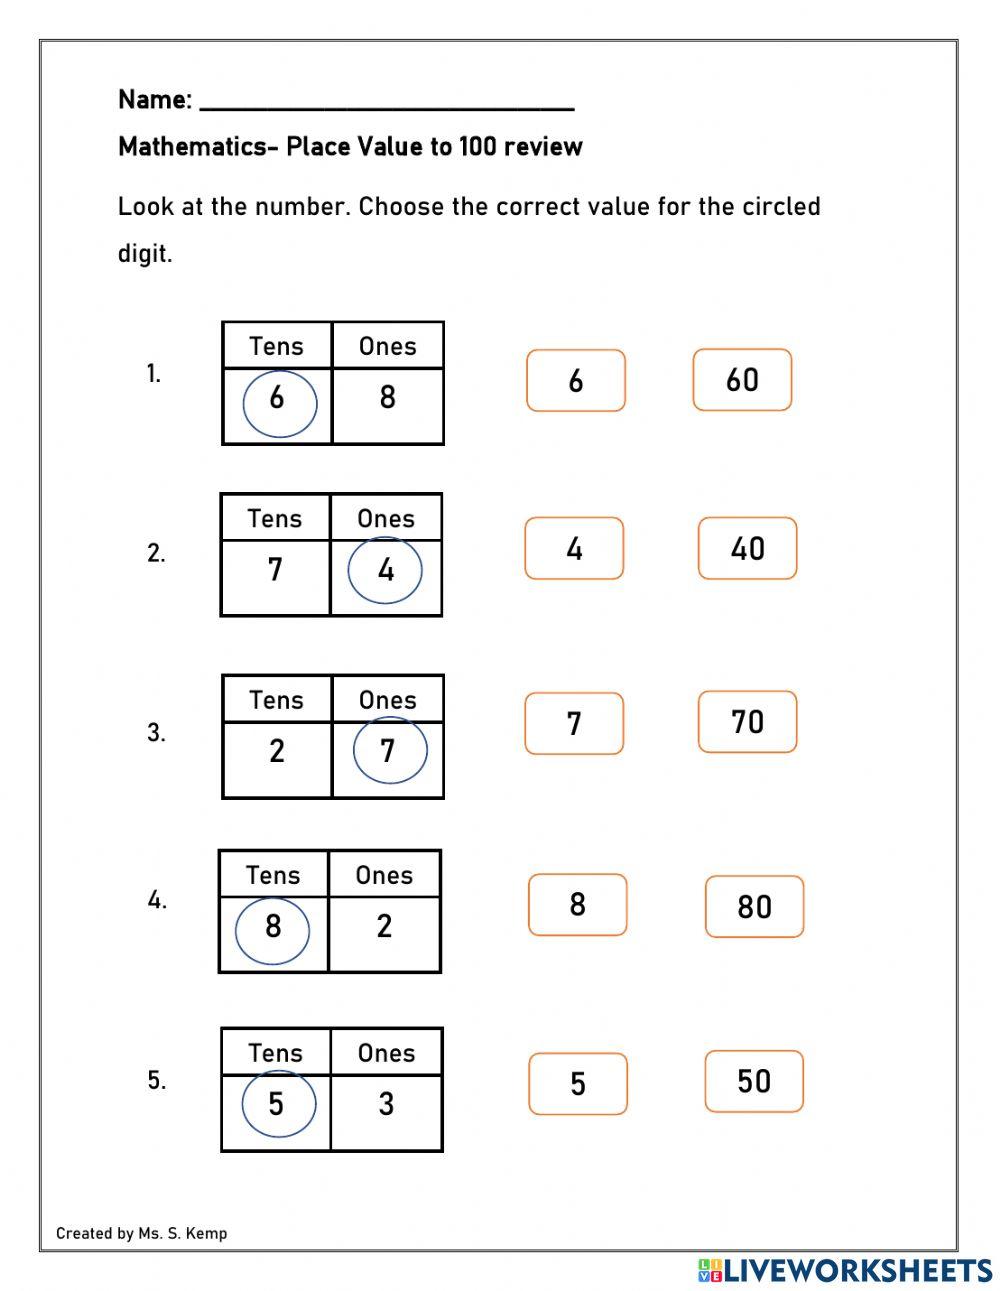 Place Value to 100 Review